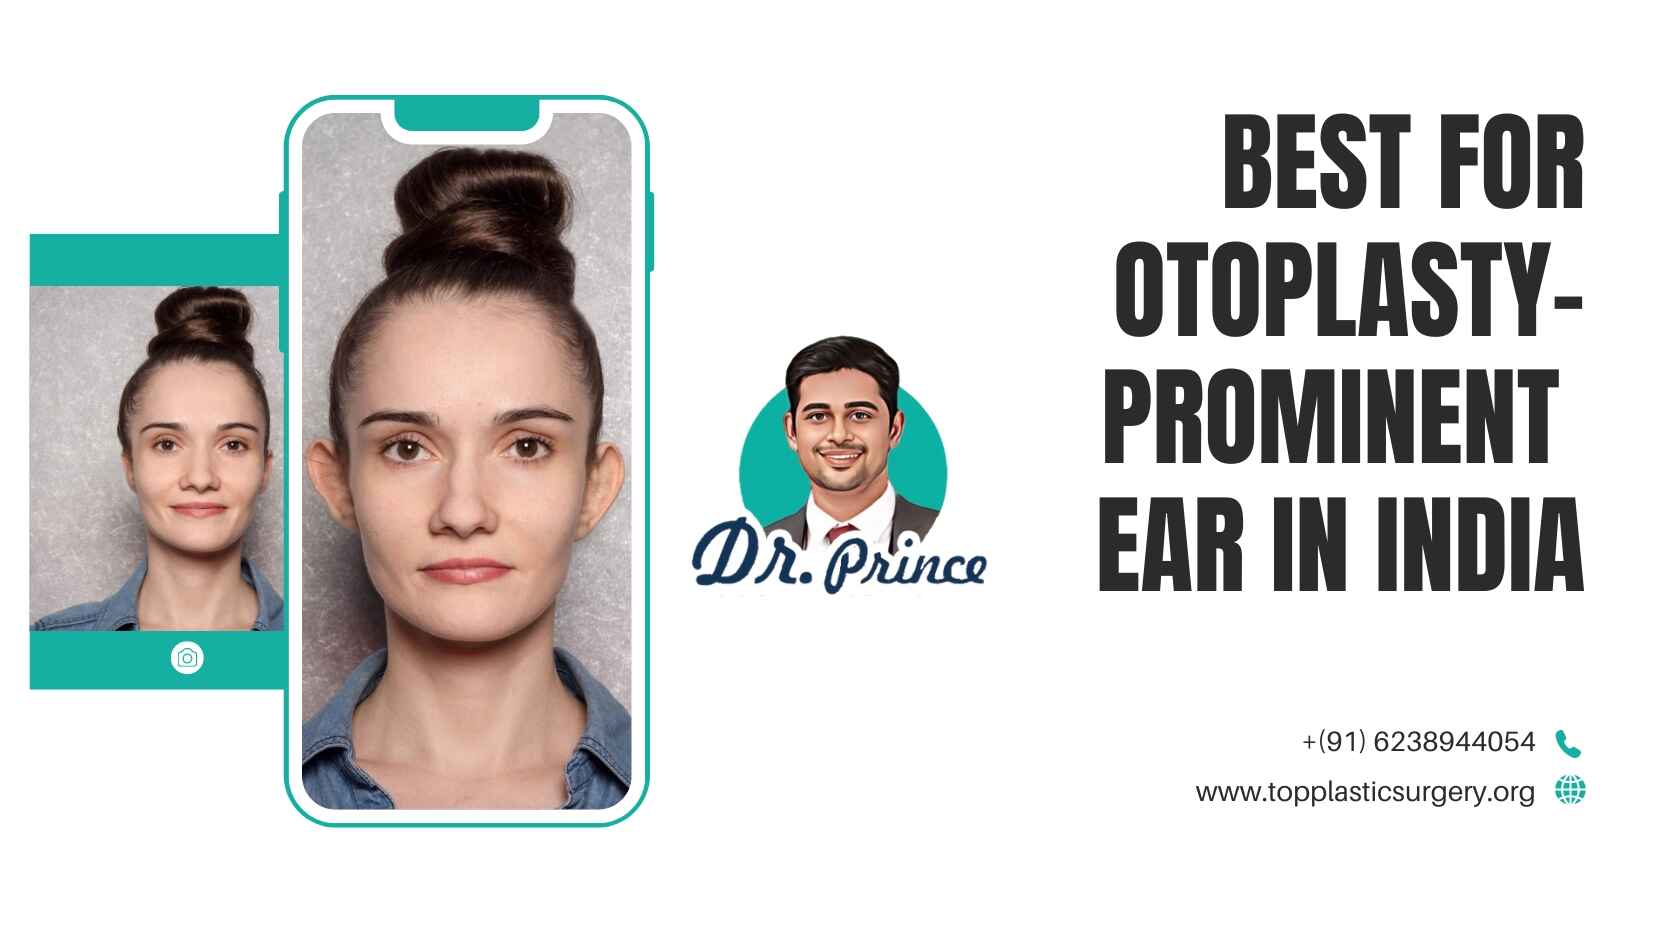 Dr. Prince specializes in otoplasty to correct prominent ears.